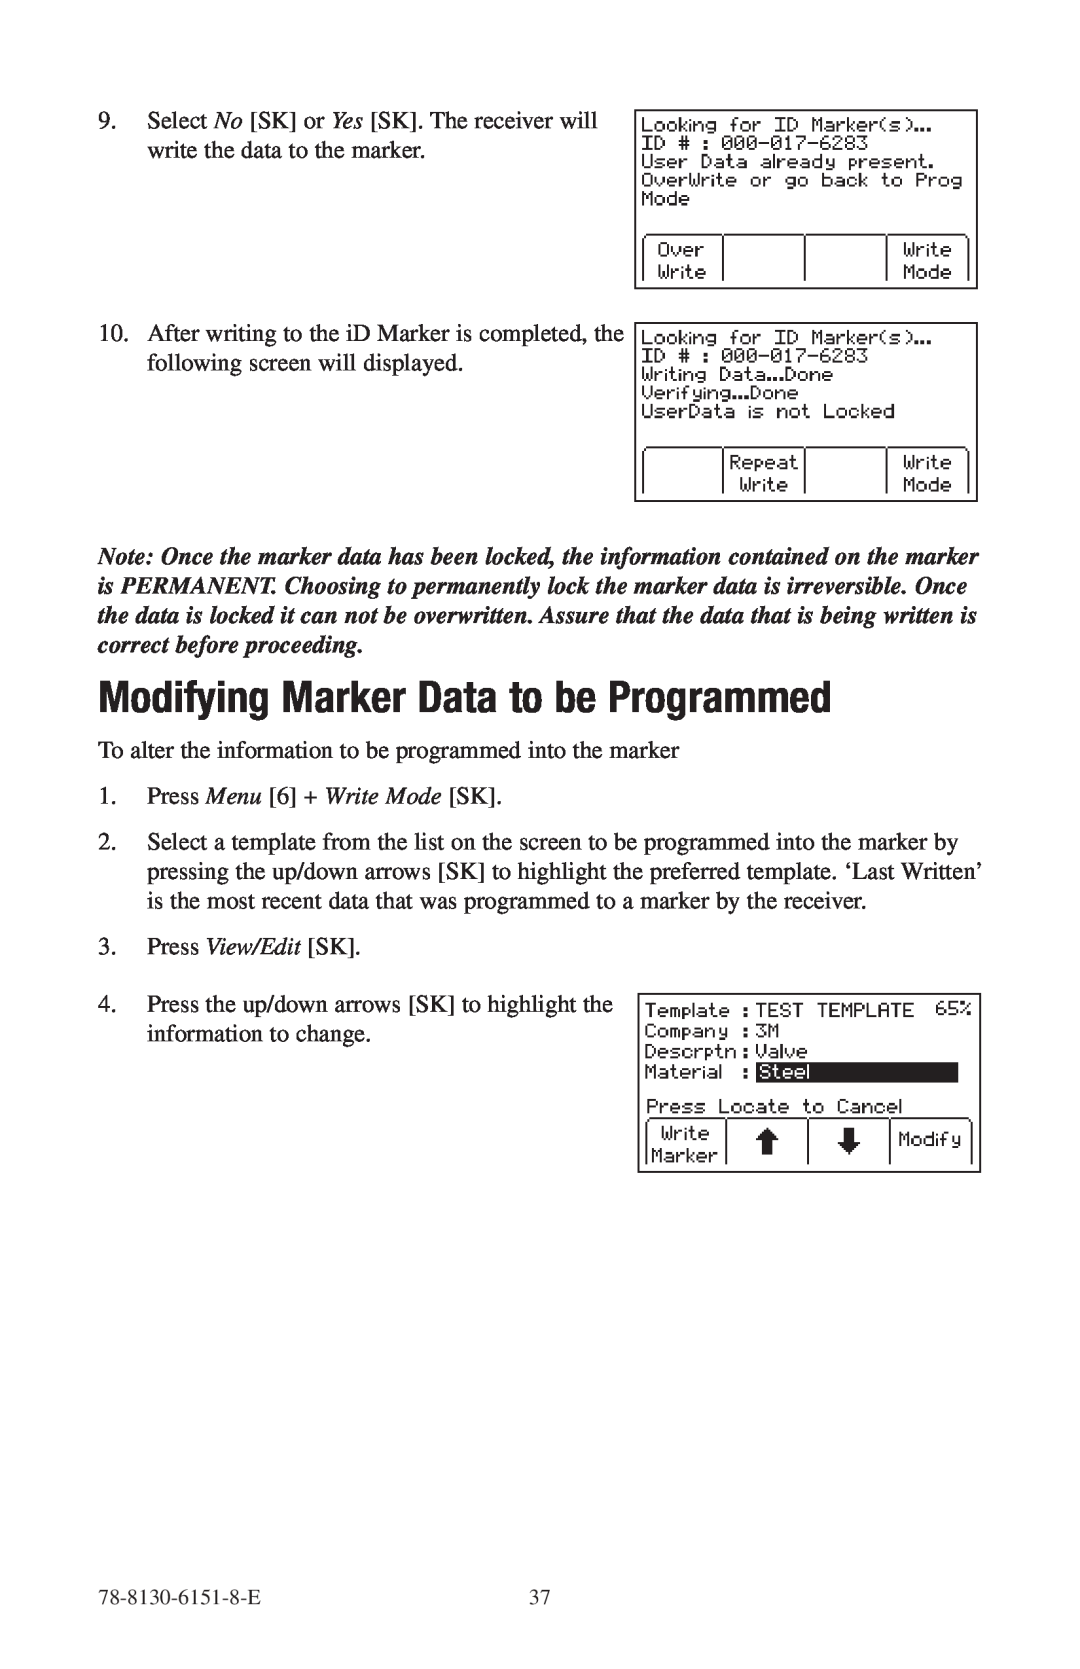 3M 2250ME-iD, 2273ME-iD manual Modifying Marker Data to be Programmed 